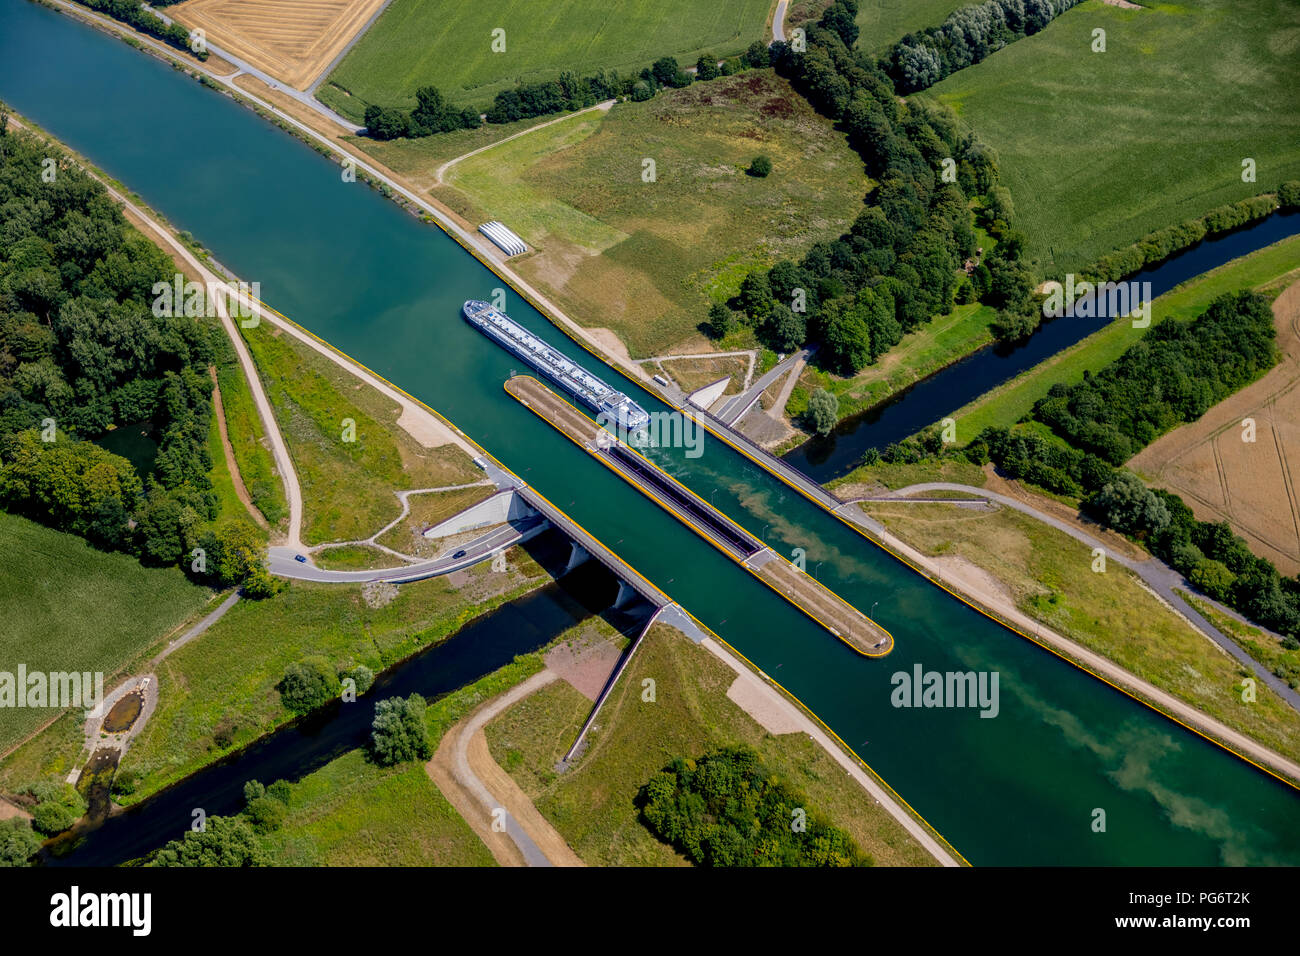 Canal bridge, water bridge, canal crossing with the Lippe river, lippe river, inland vessels, cargo ship, inland navigation, bridge construction, date Stock Photo